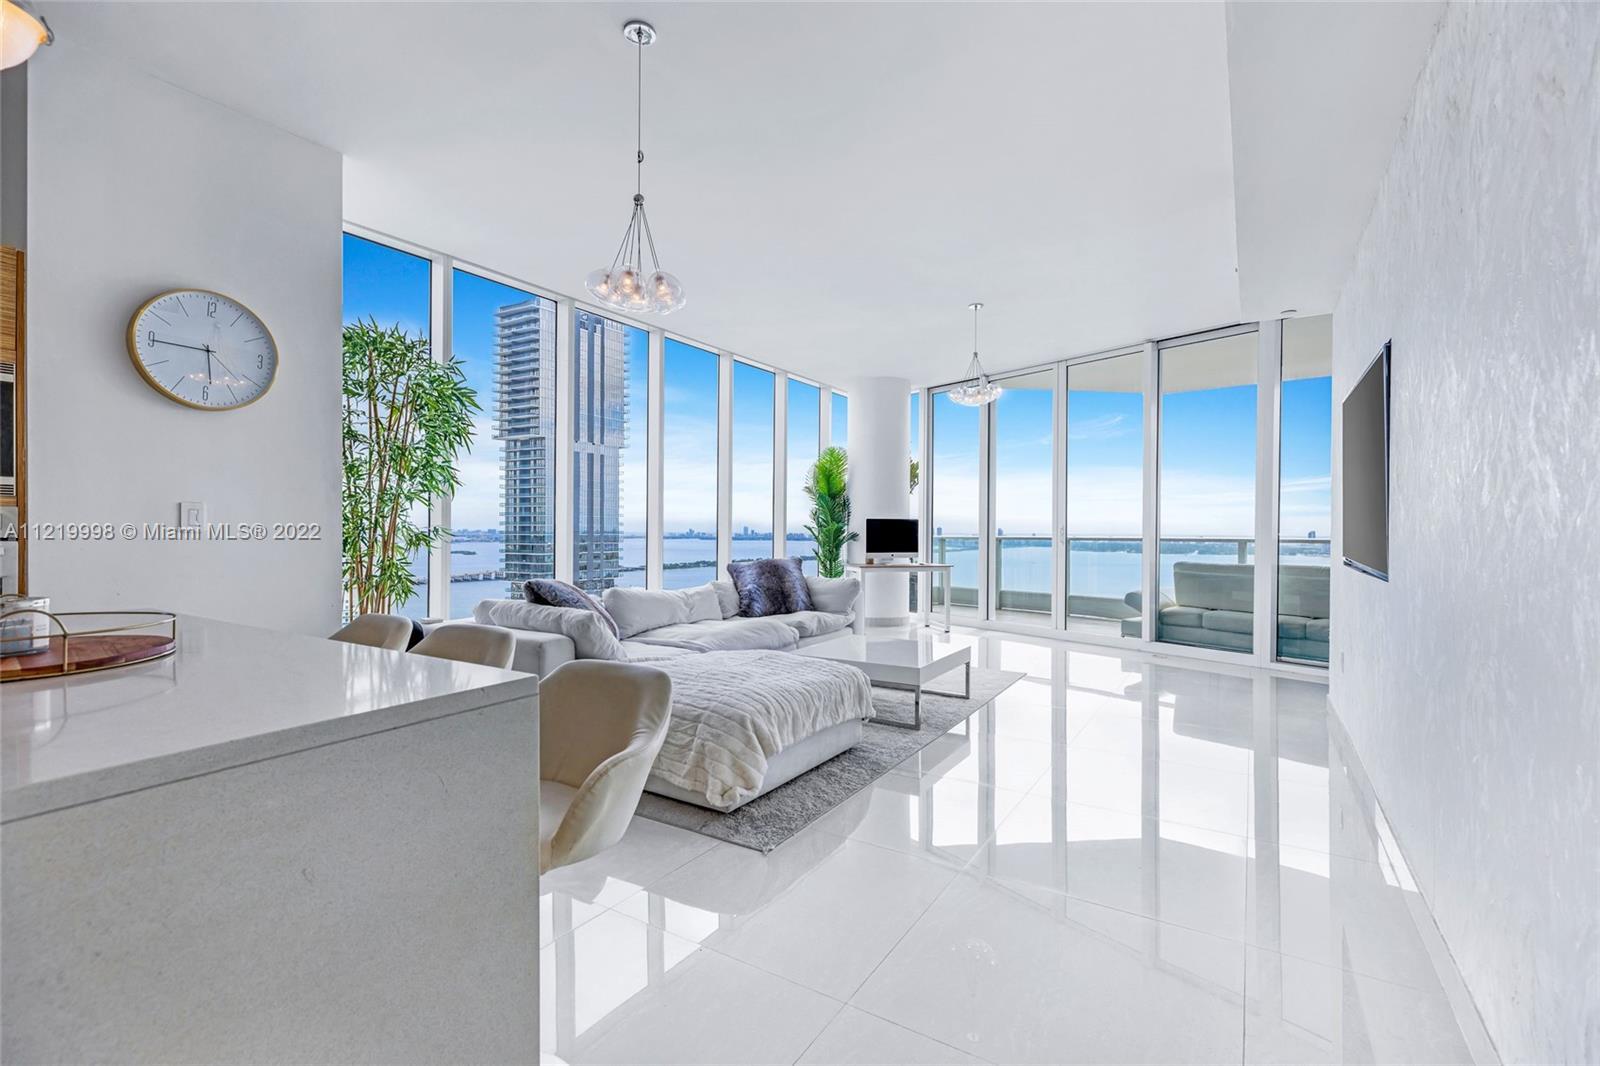 UNOBSTRUCTED ocean and Biscayne Bay views at the ultra luxury Paramount Bay. This gorgeous NE corner